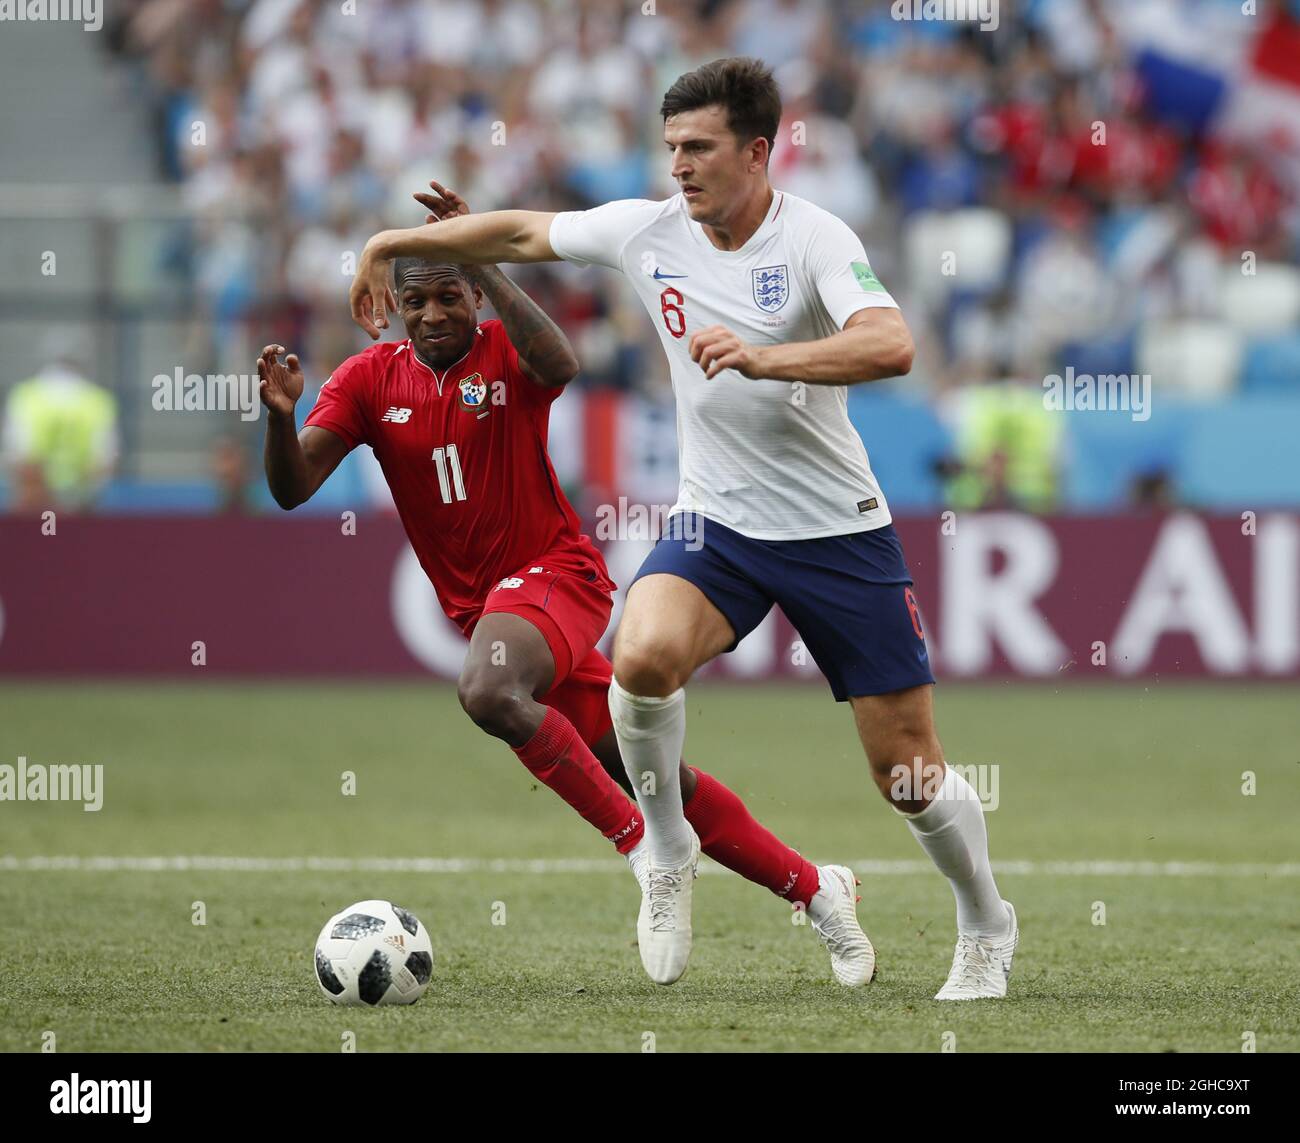 Harry Maguire of England tackled by Armando Cooper of Panama during the FIFA World Cup 2018 Group G match at the Nizhny Novgorod Stadium, Nizhny Novgorod. Picture date 24th June 2018. Picture credit should read: David Klein/Sportimage via PA Images Stock Photo